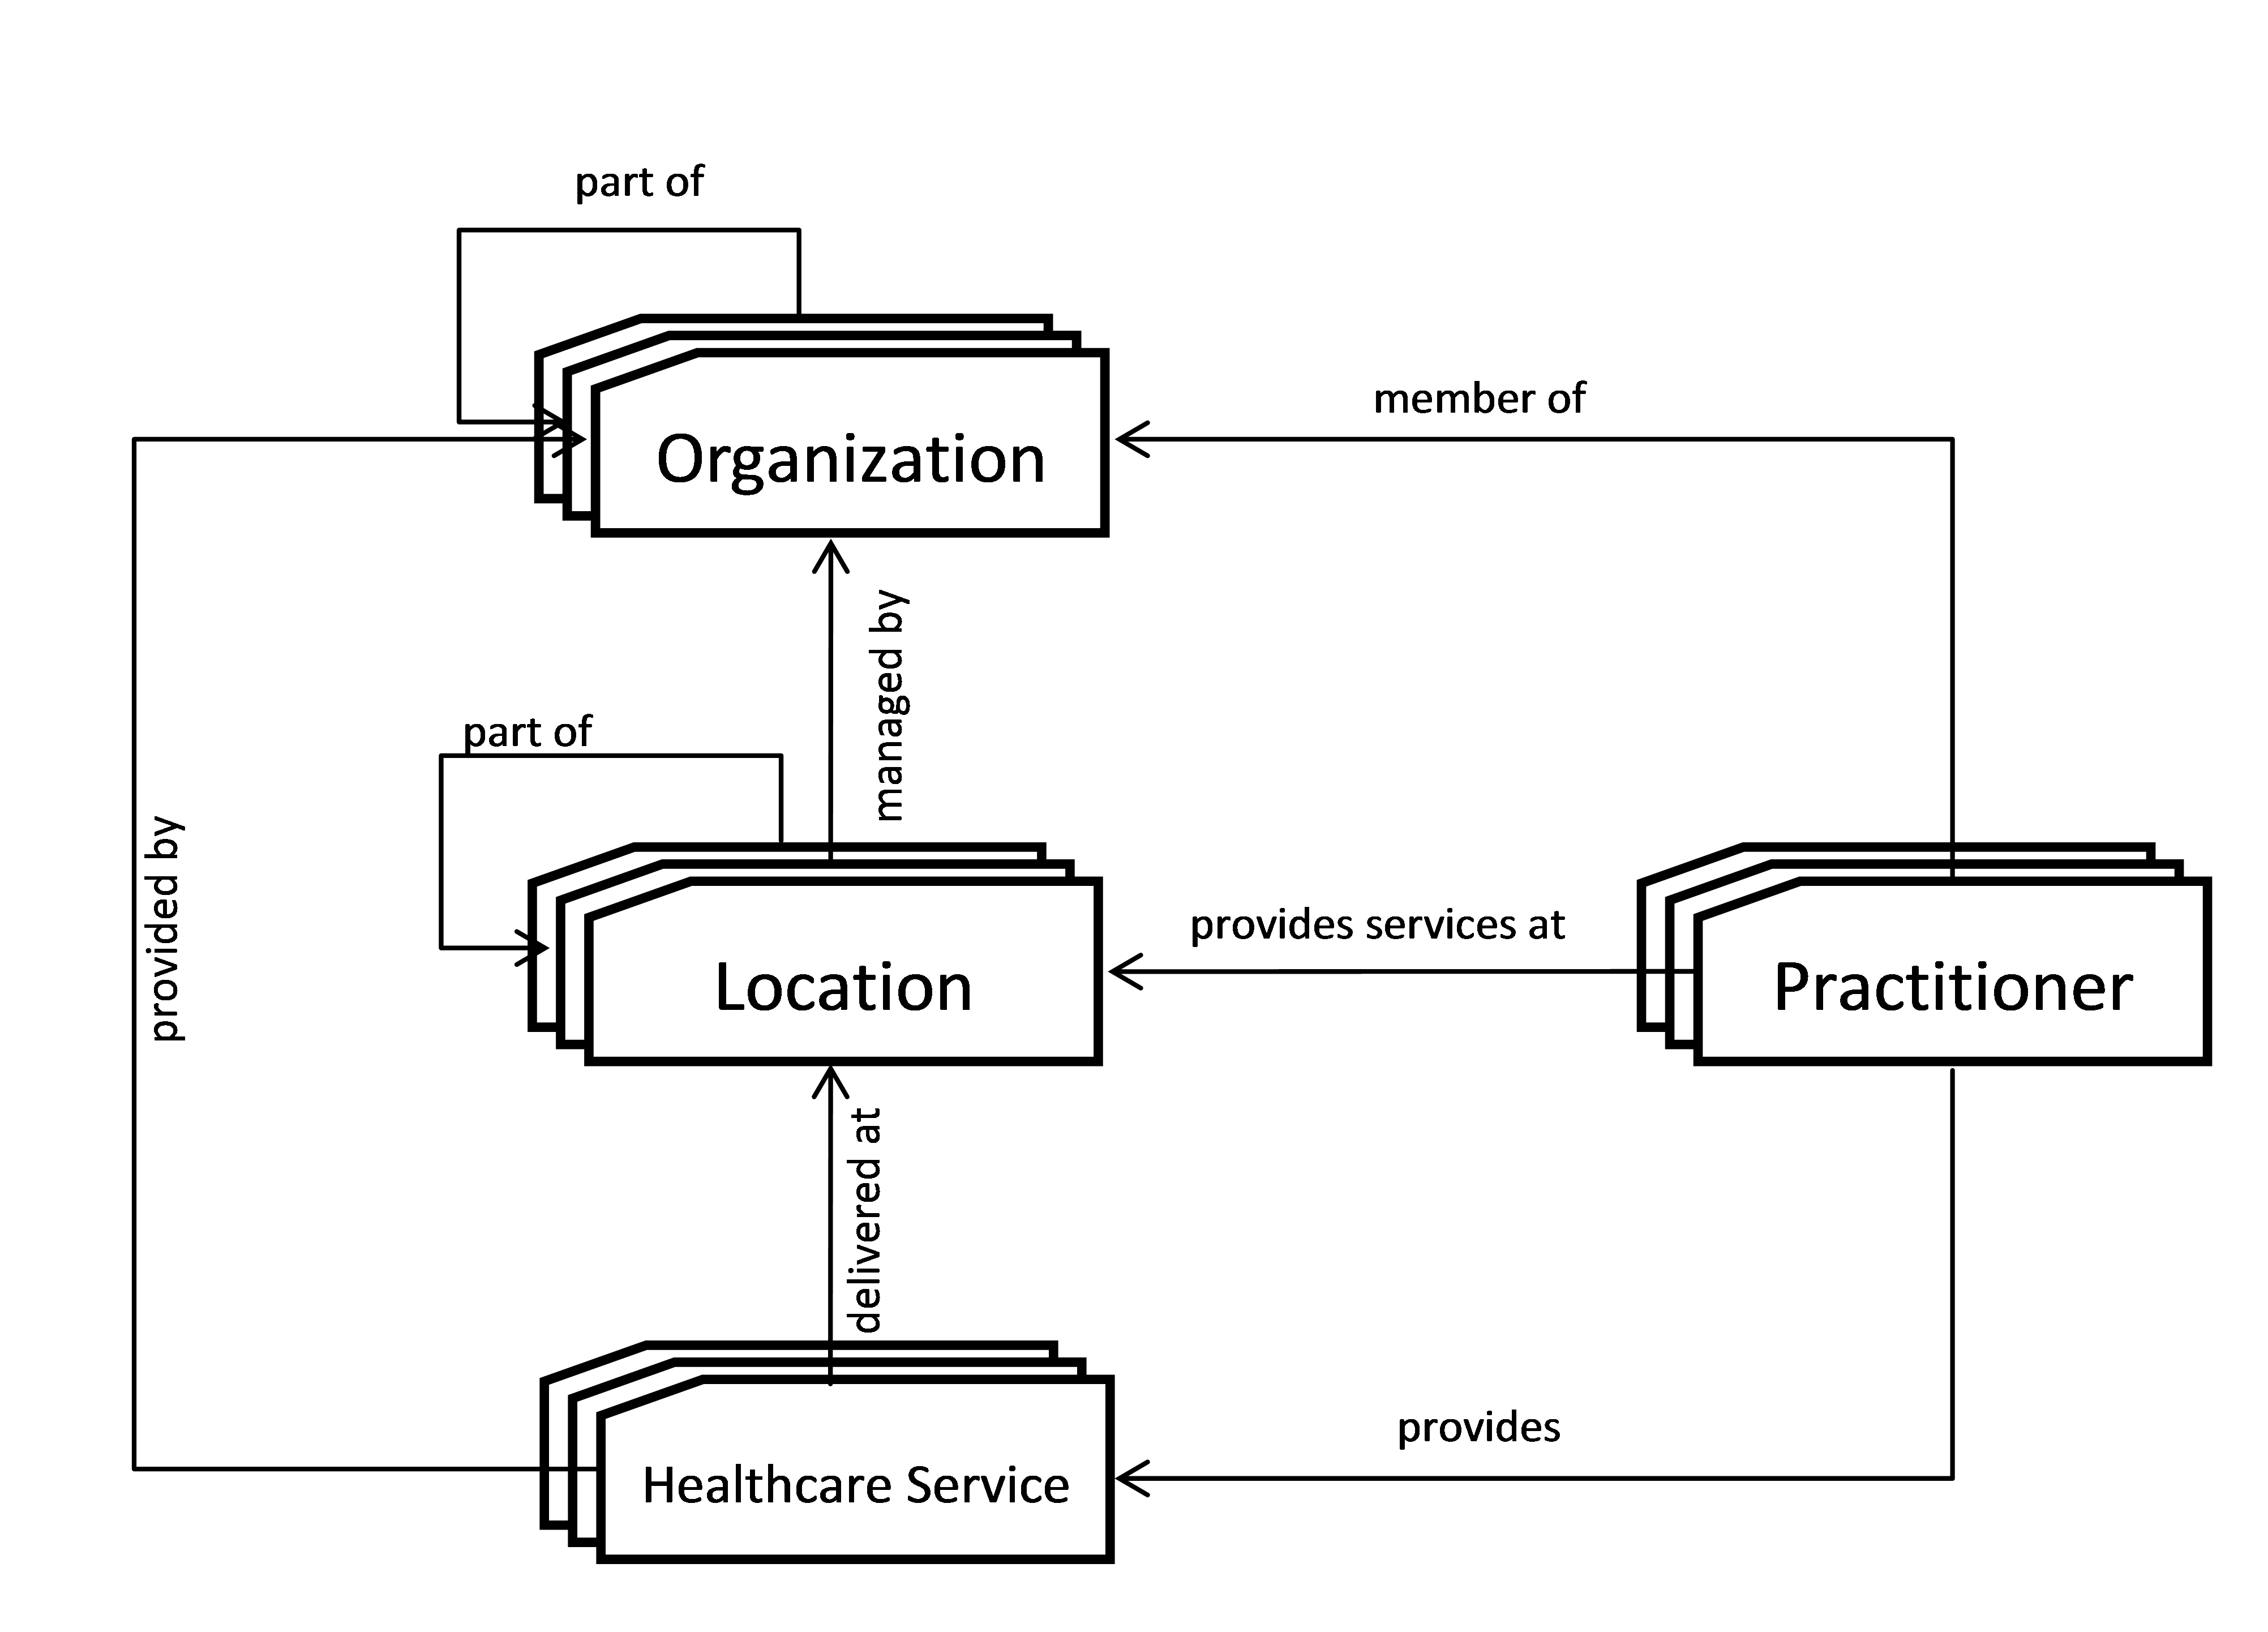 mCSD Top-Level Relationships between Care Services Entities